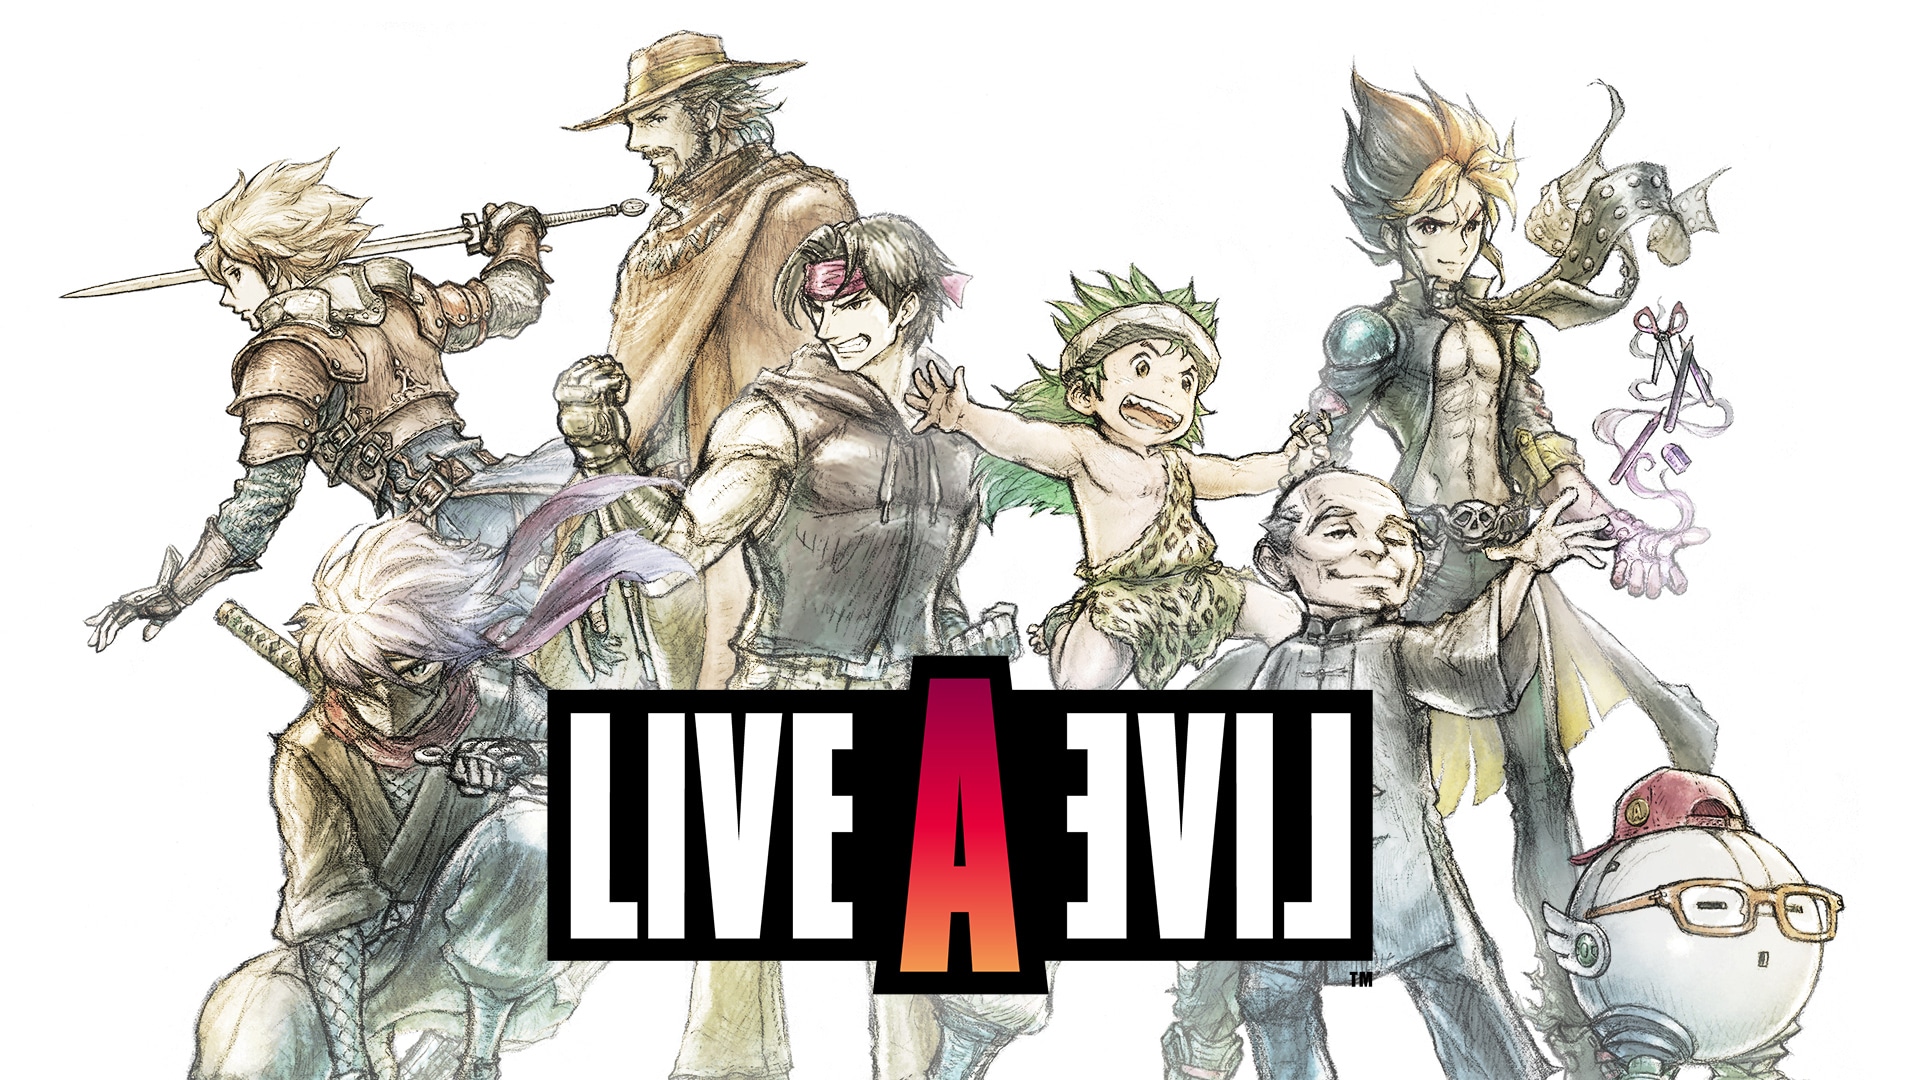 Live A Live Soundtrack Available for Pre-Order; 2 CDs by Yoko Shimomura & July 2022 Release